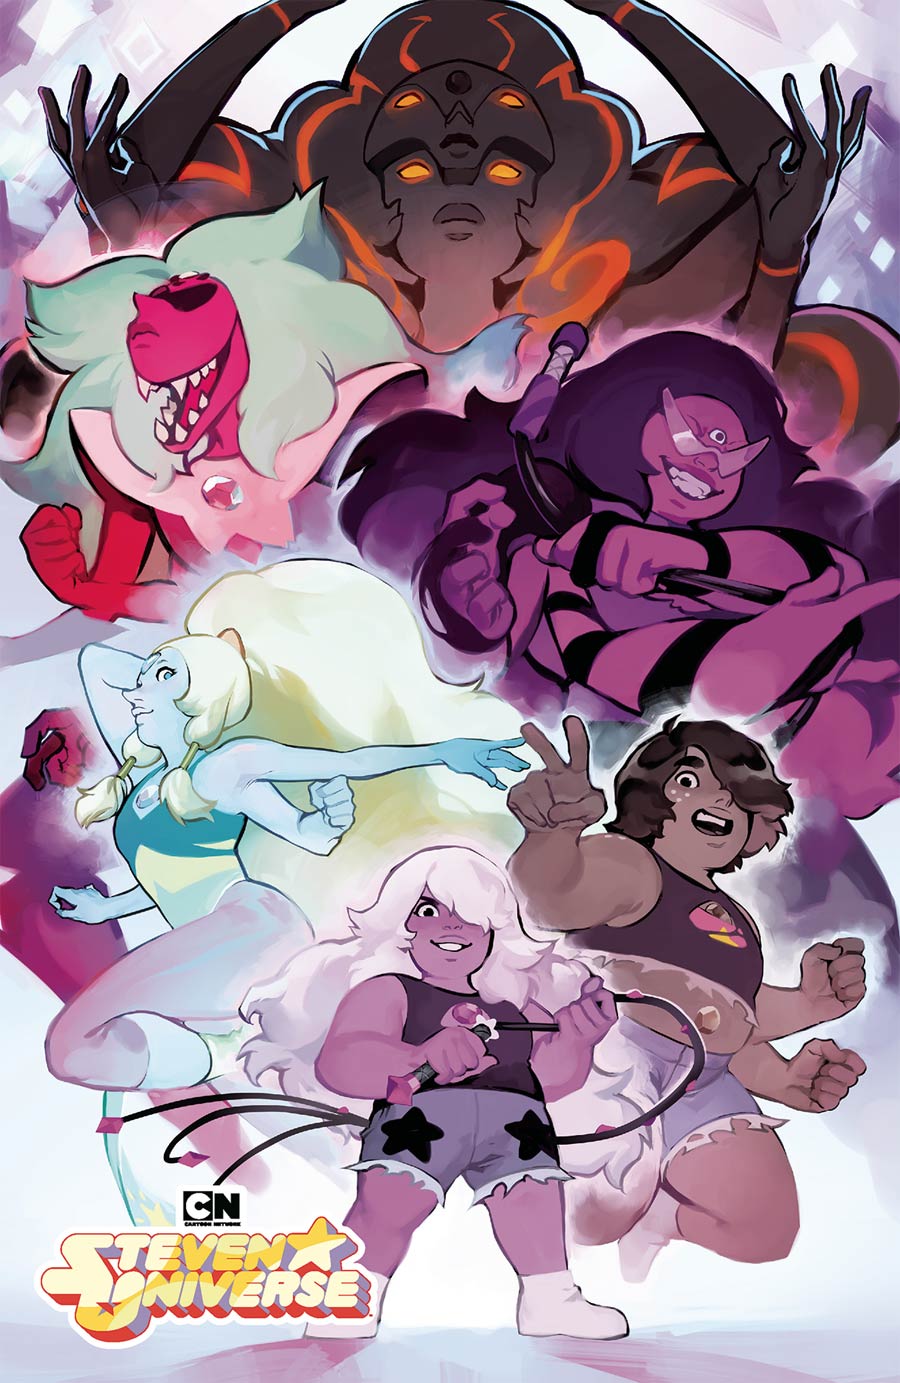 Steven Universe Vol 2 #26 Cover C Convention Exclusive Xiao Tong Kong Variant Cover